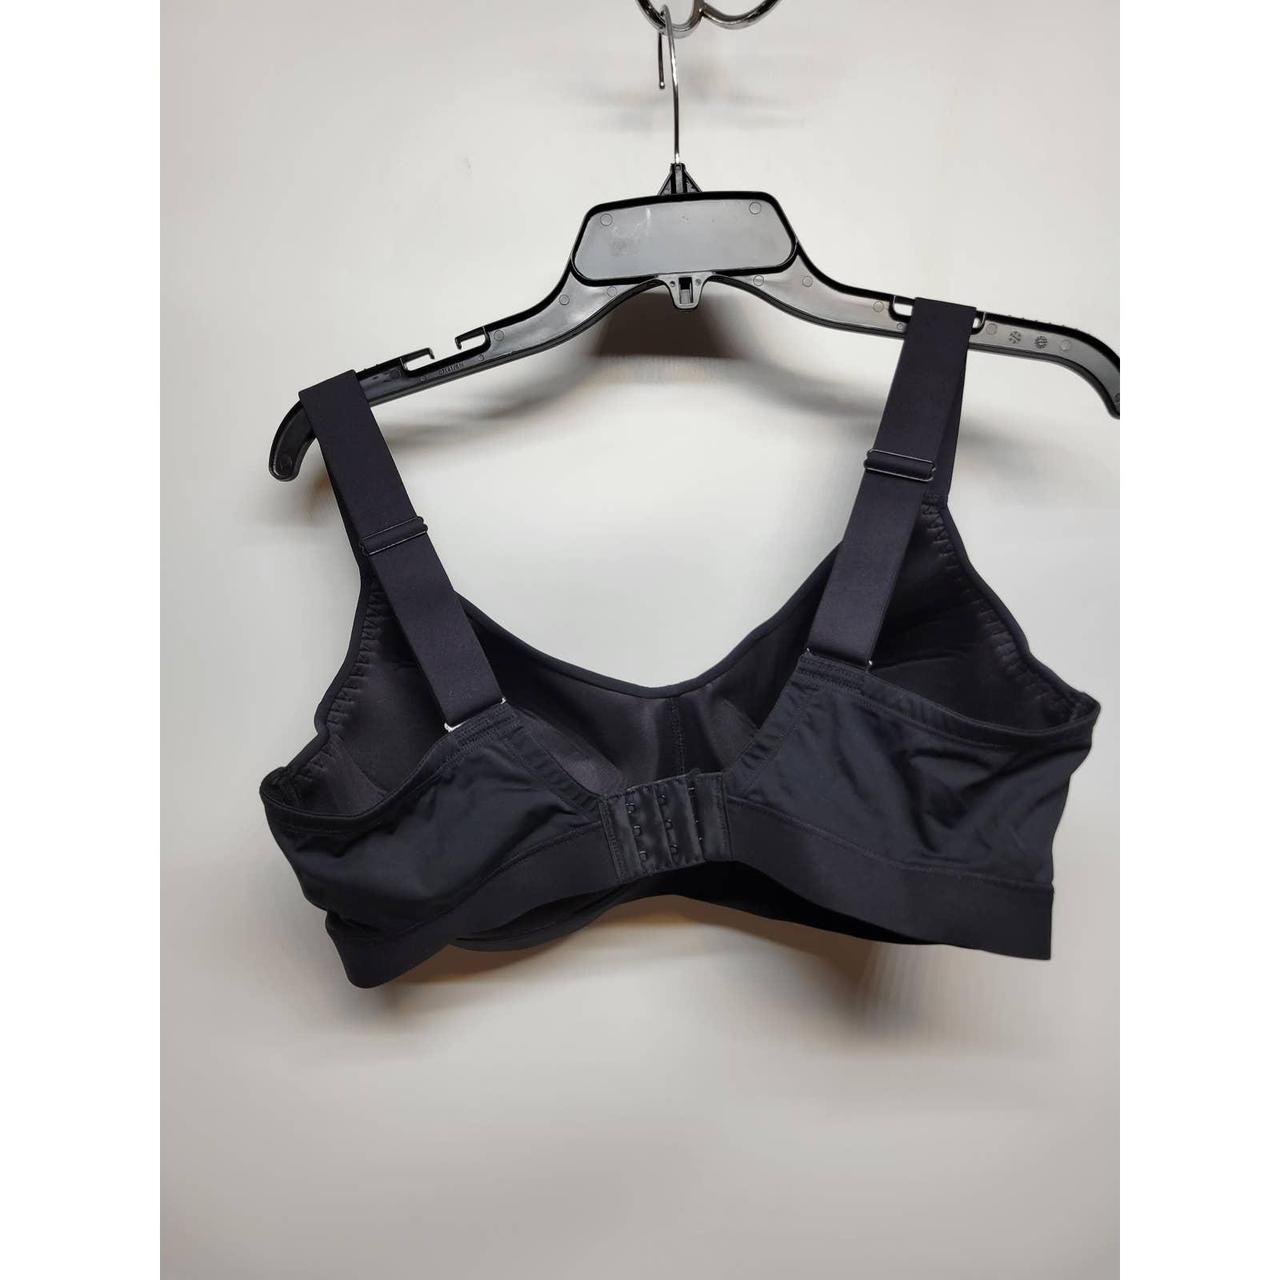 Product Image 3 - Natori
New without tags
Size 38D 
Black
Underwire